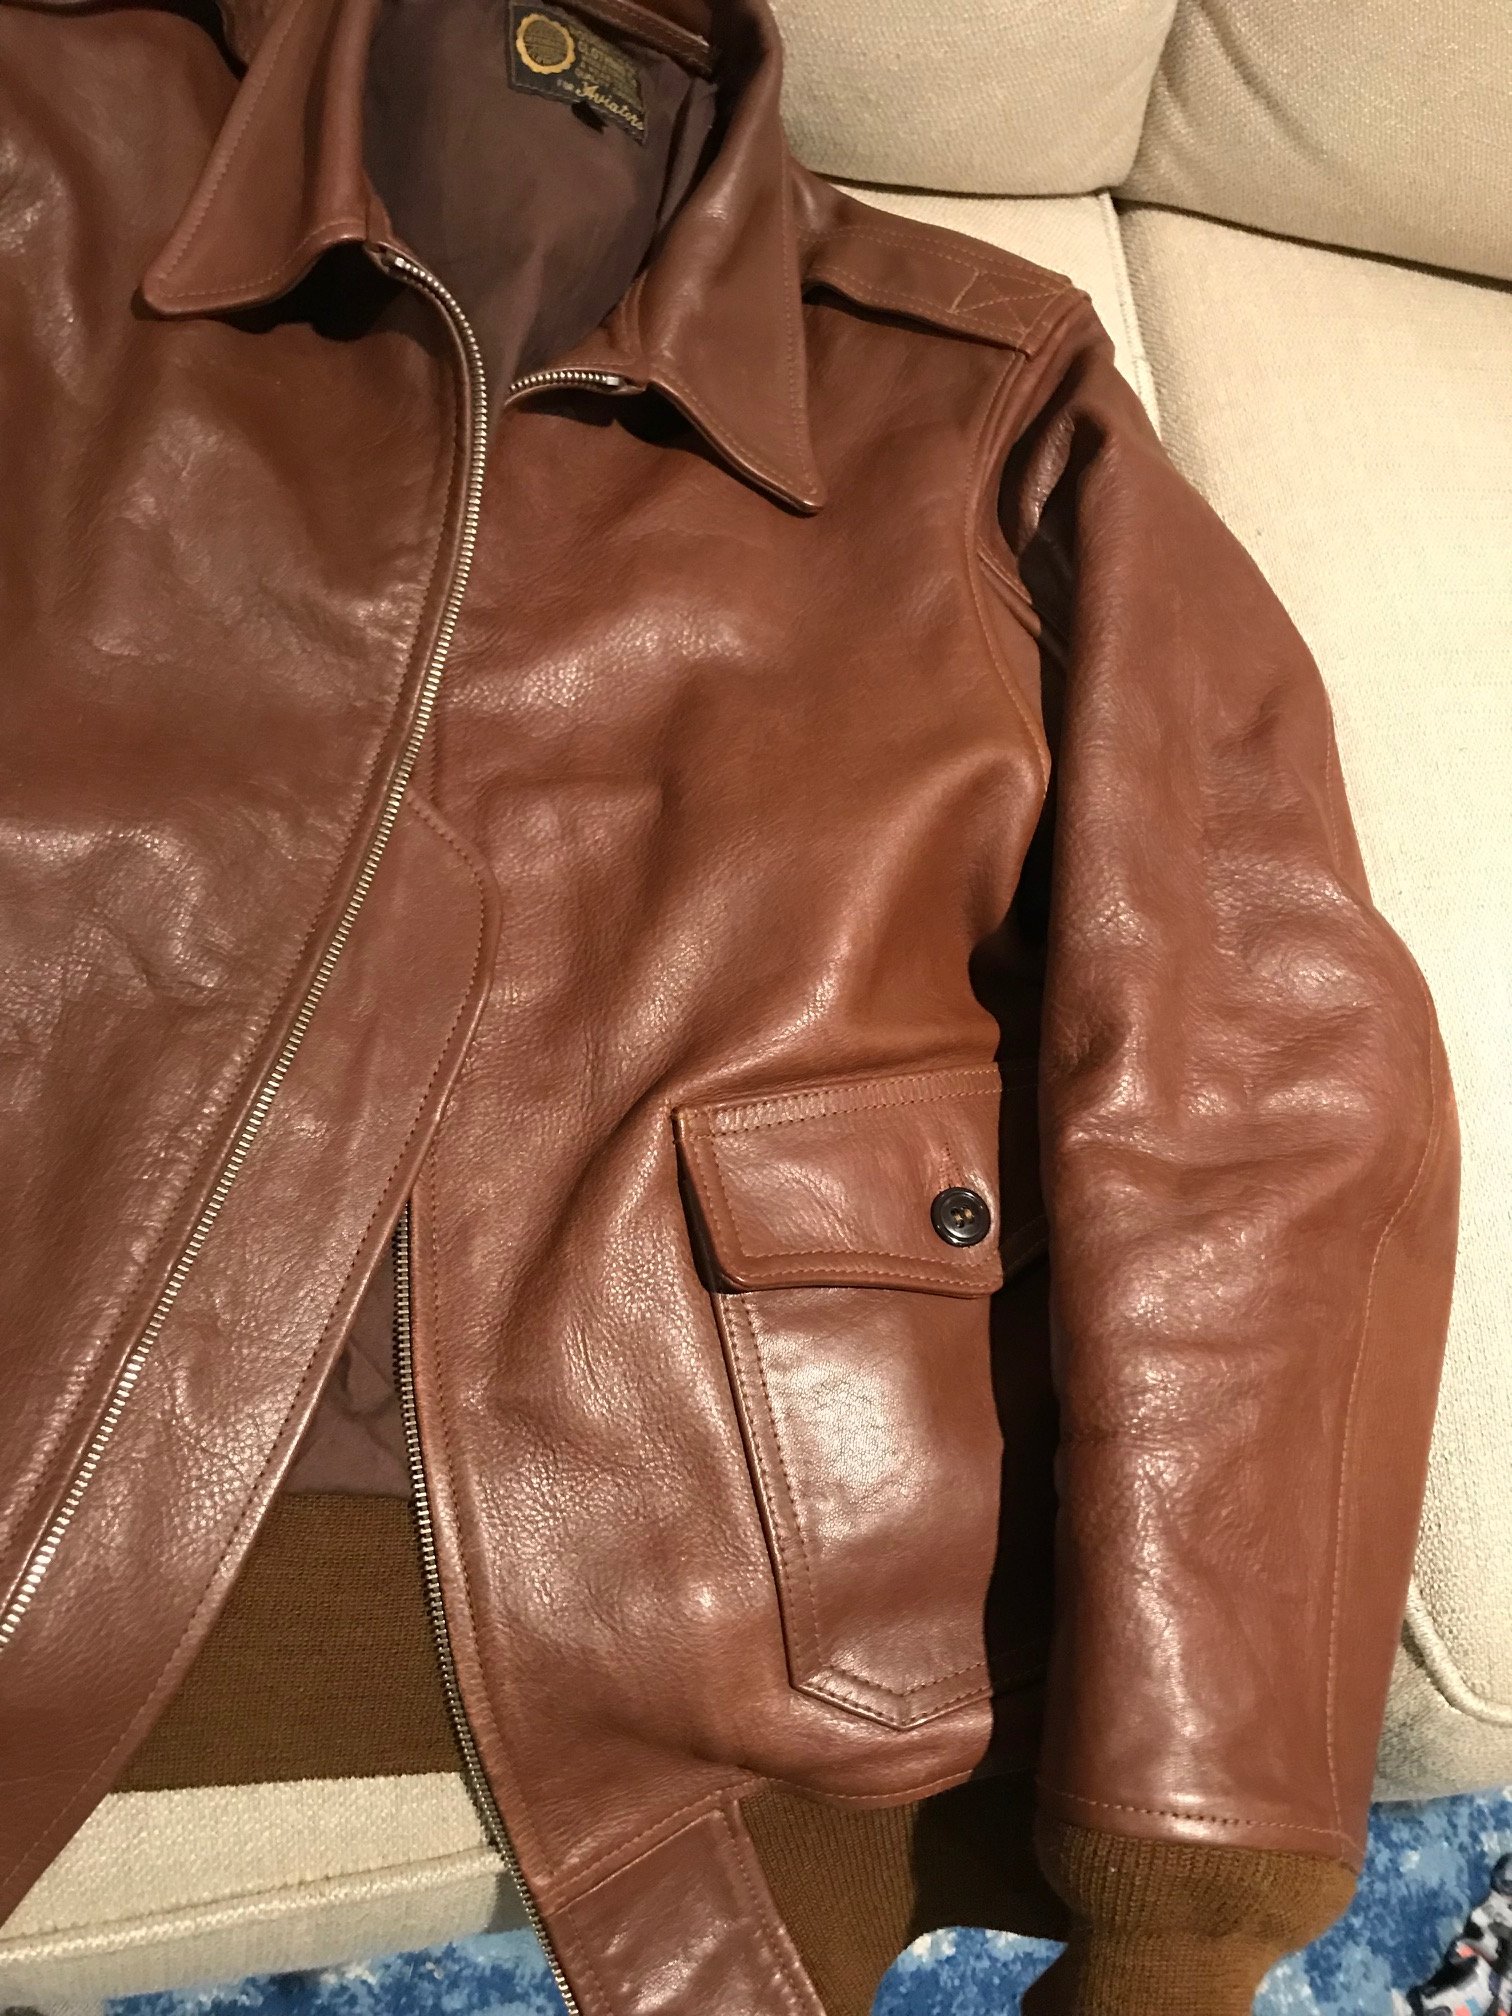 Bill Kelso timeline of leather, with a little wear thrown in... | Page ...